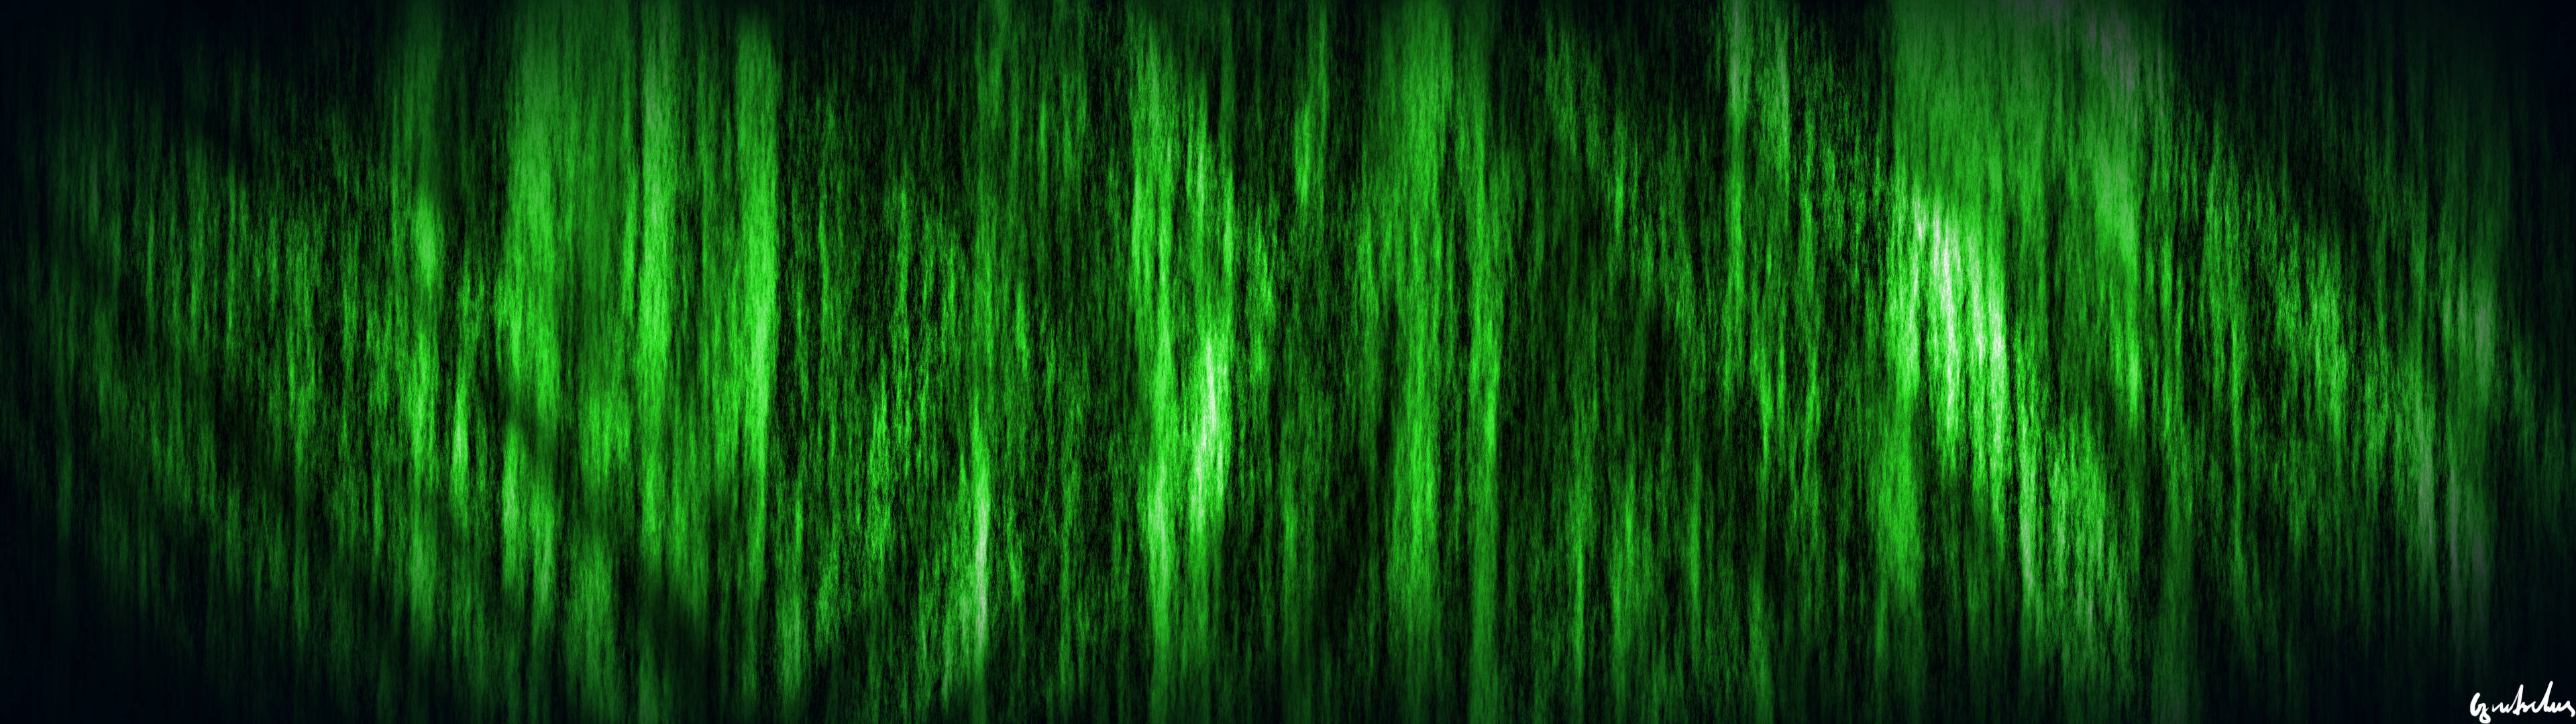 Black And Green Fuzzy Background Background